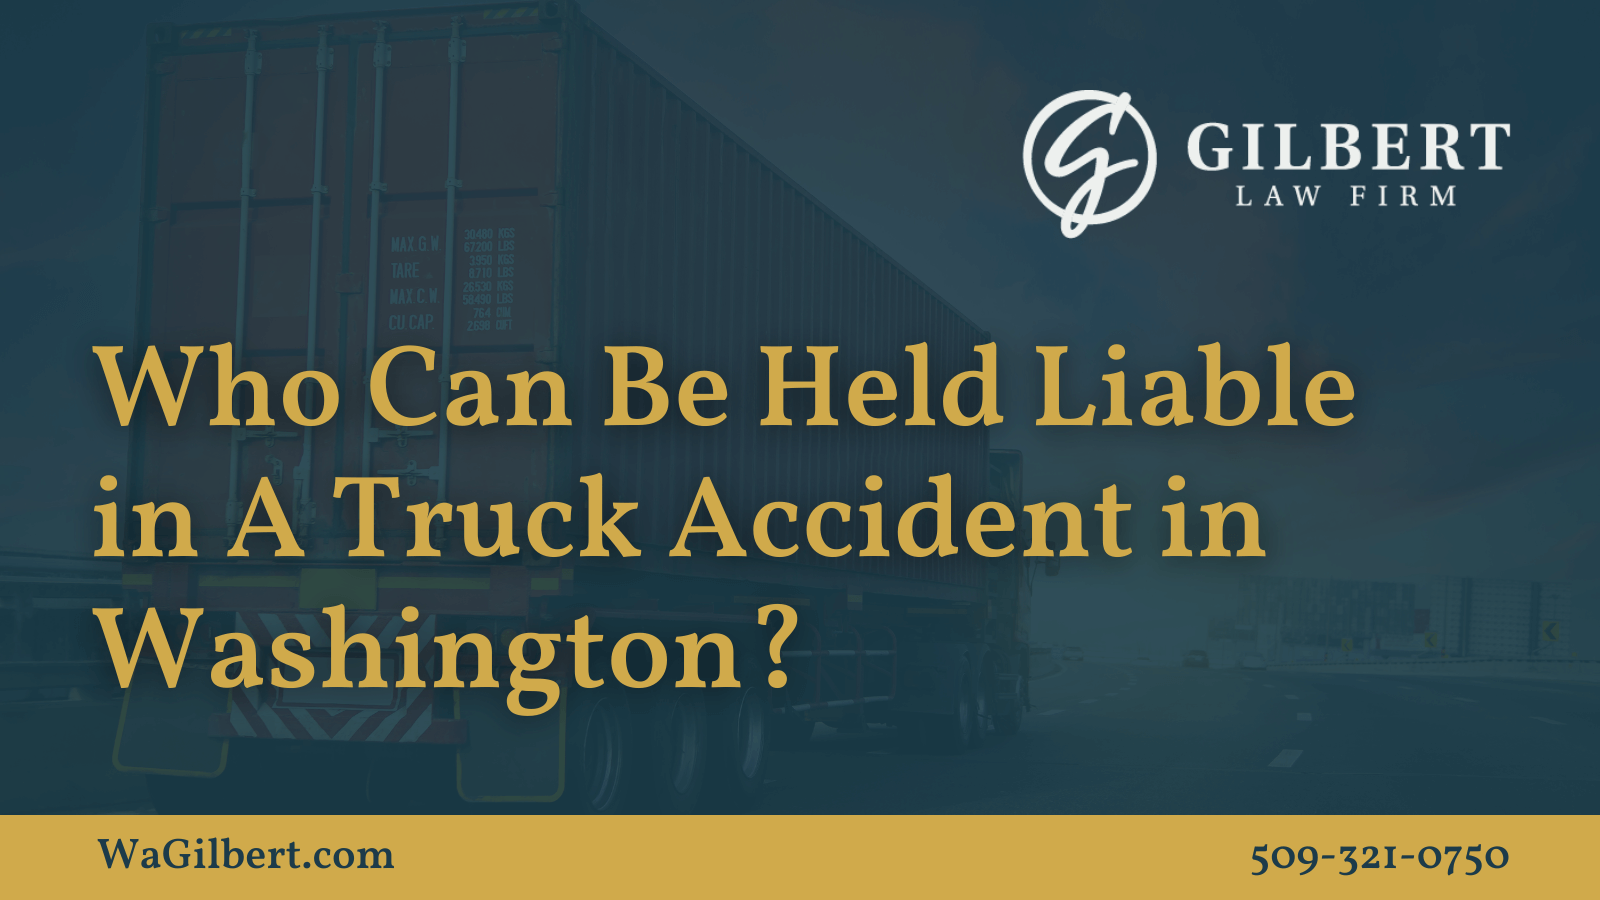 Who Can Be Held Liable in A Truck Accident in Washington | Gilbert Law Firm Spokane Washington